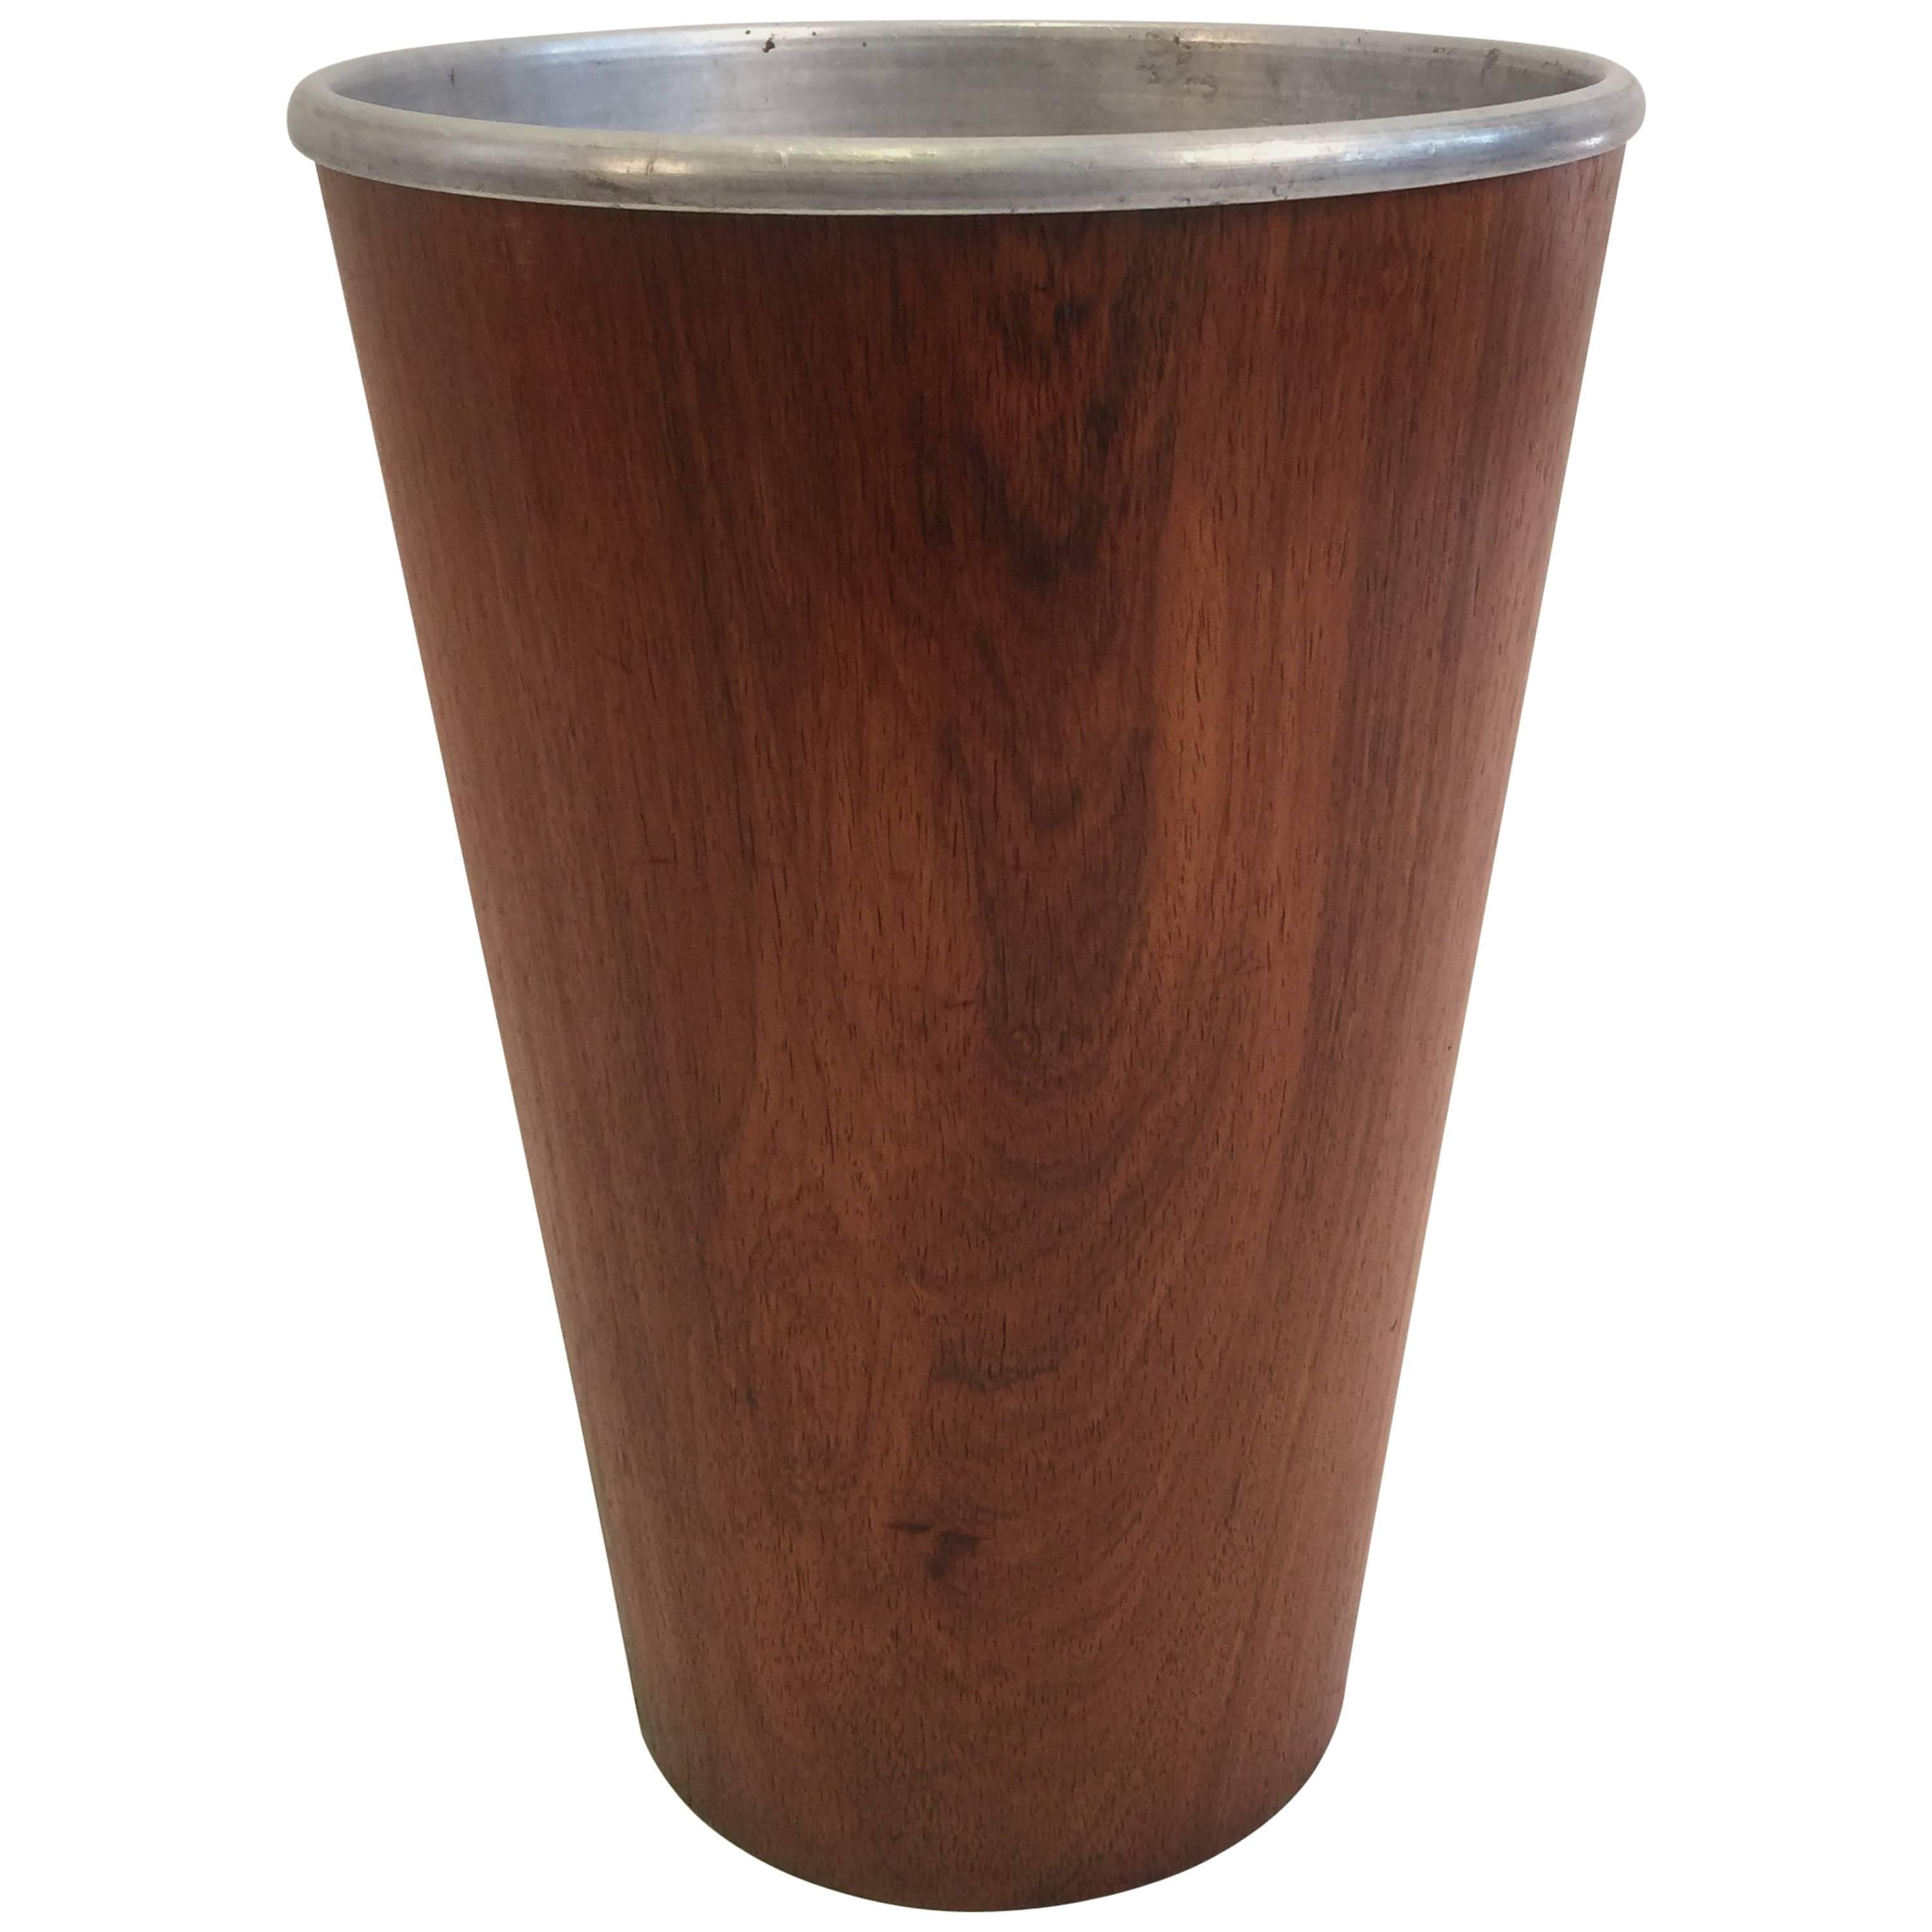 Rosewood Wastebasket with Metal Insert by Martin Aberg for Servex